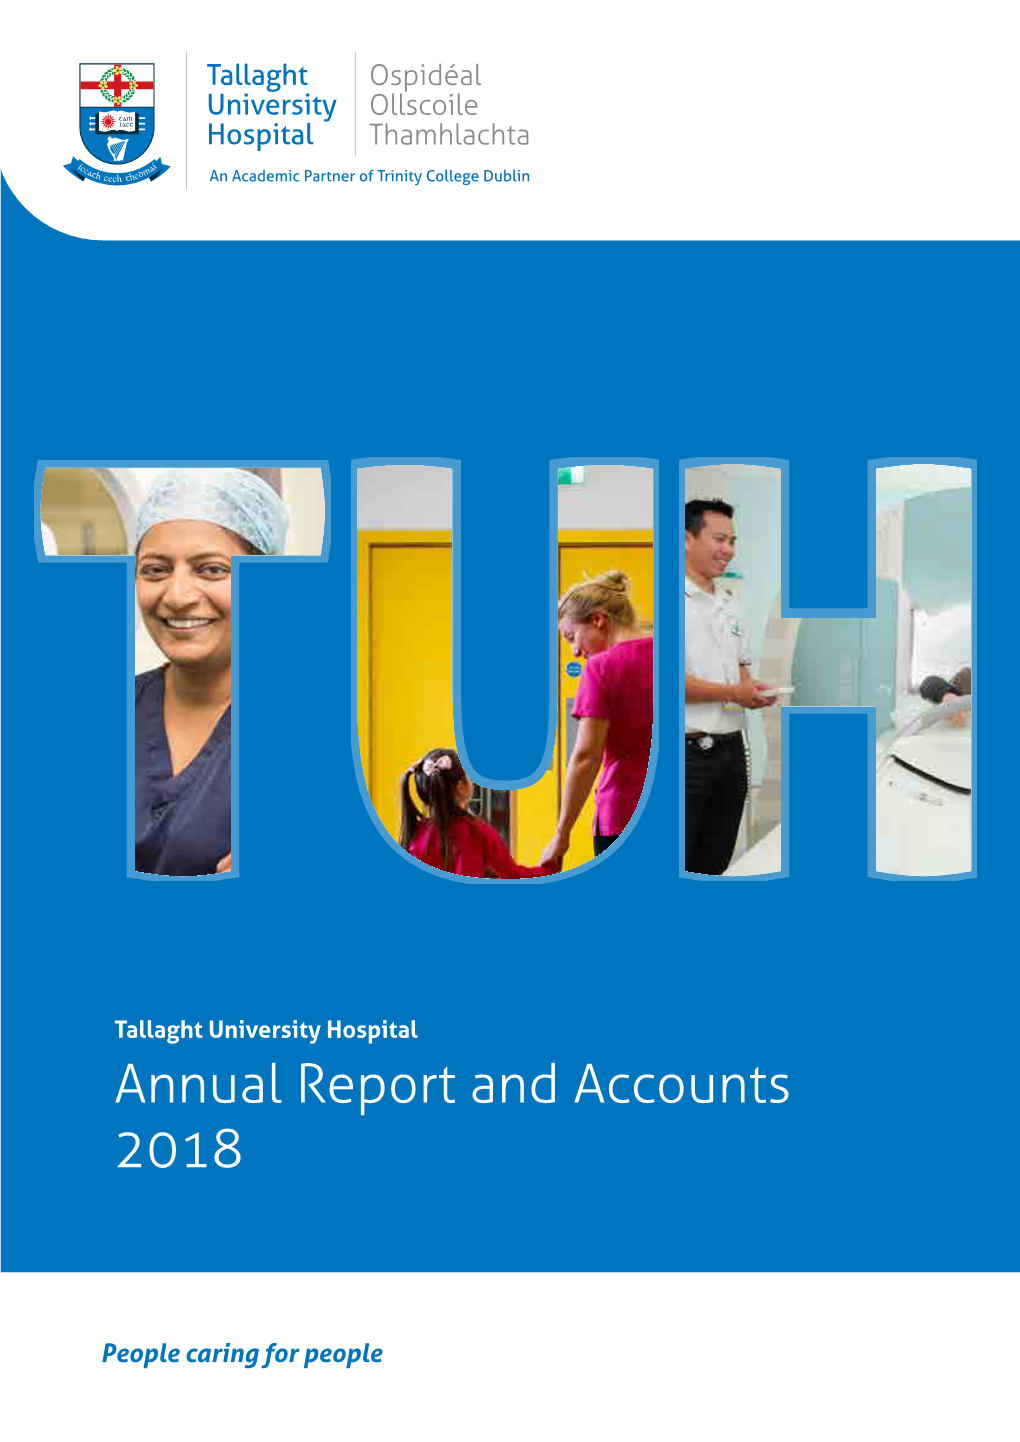 Annual Report and Accounts 2018